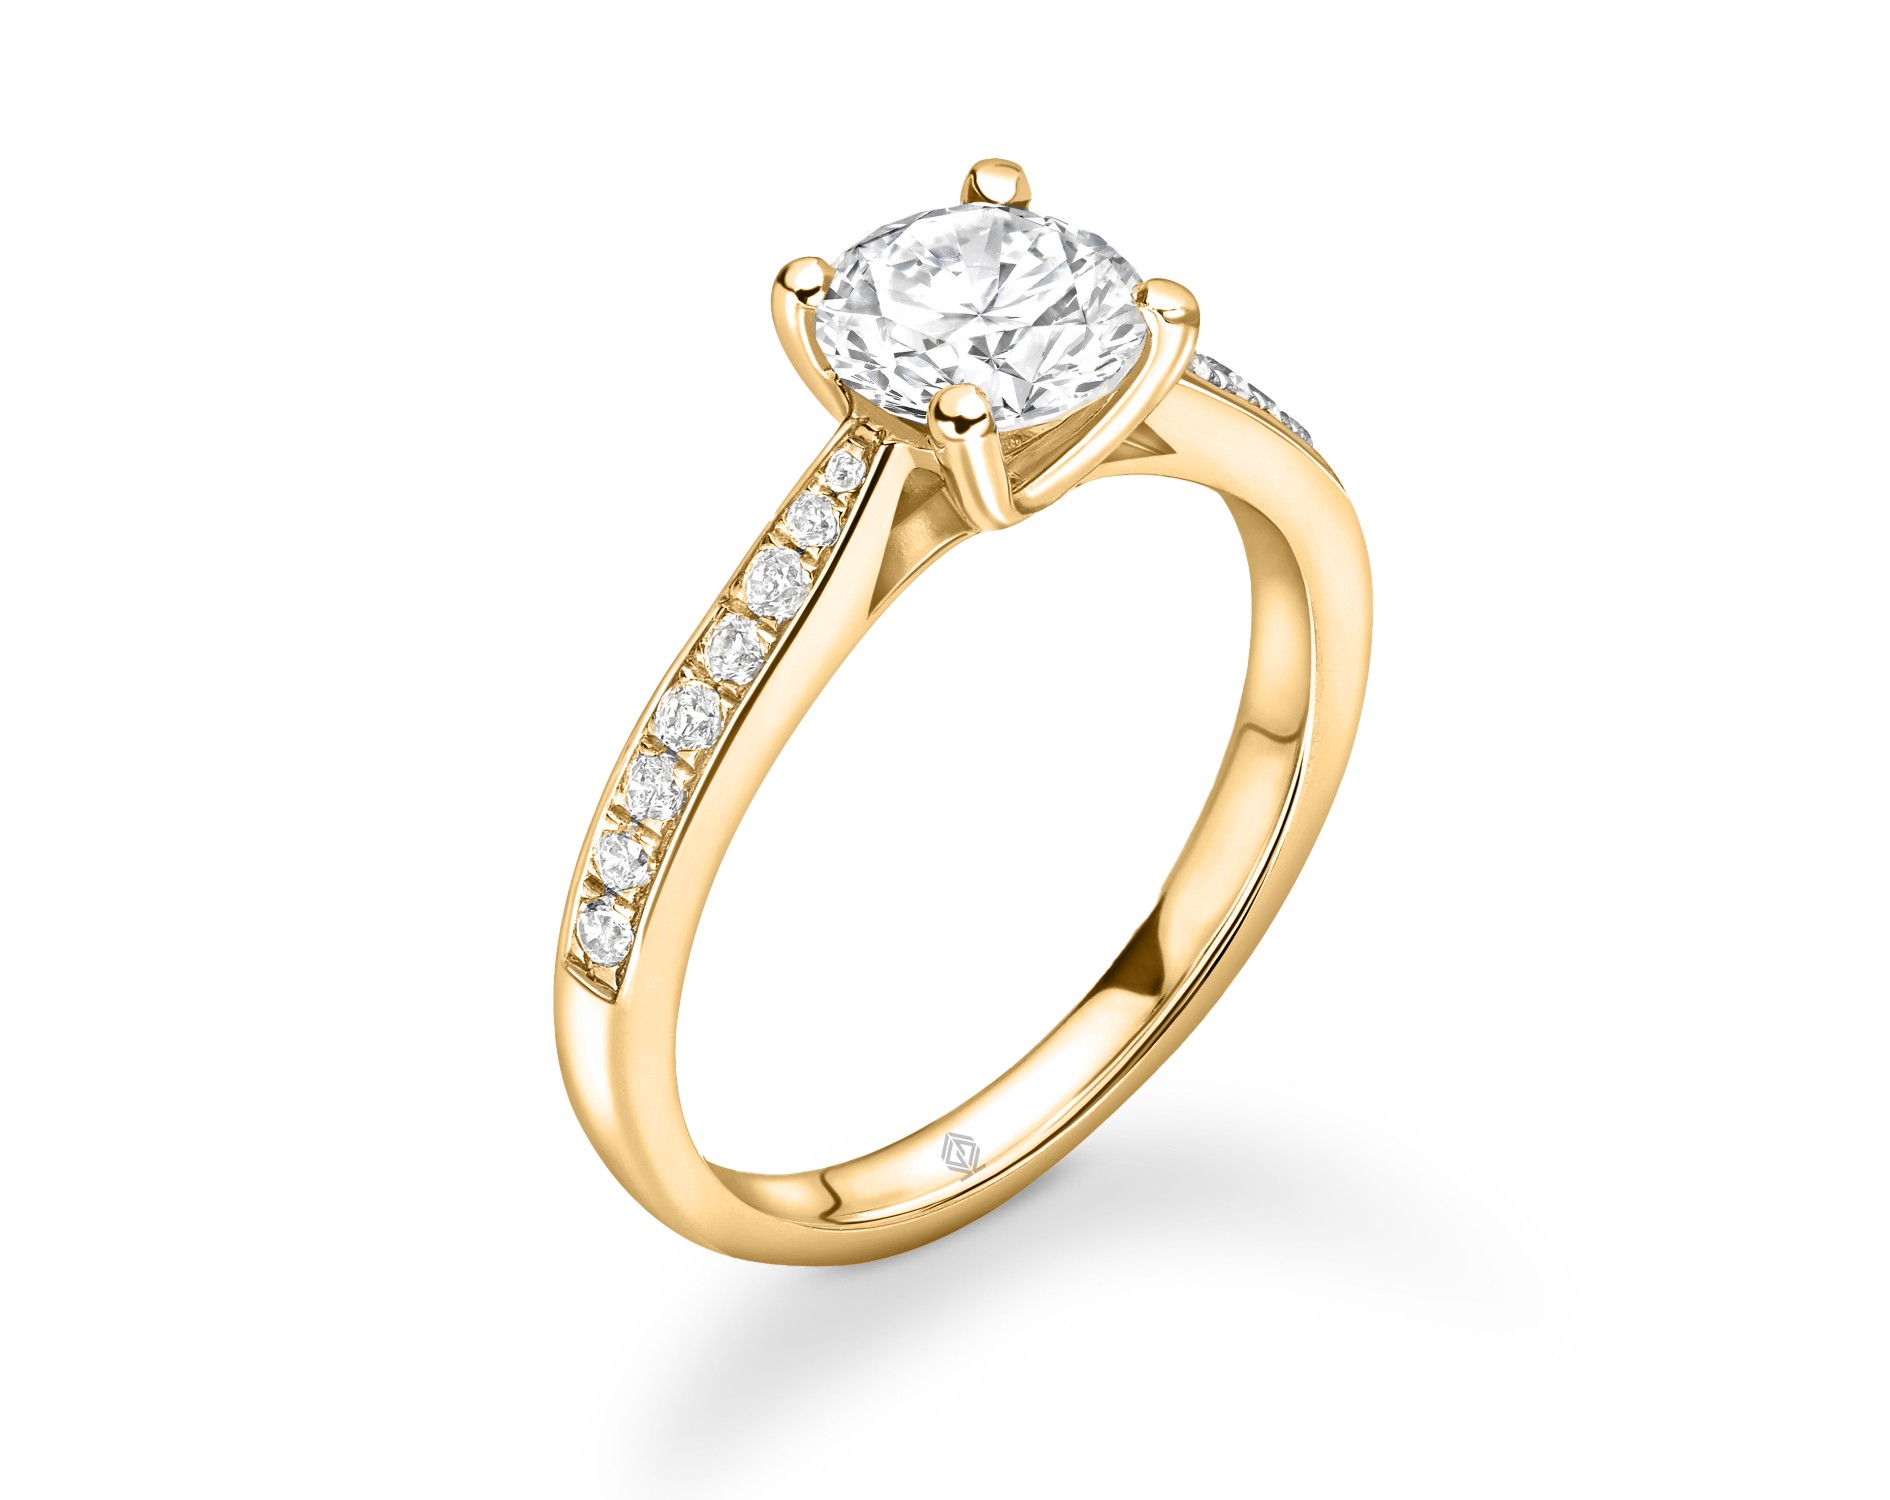 18K YELLOW GOLD ROUND CUT DIAMOND ENGAGEMENT RING WITH SIDE STONES CHANNEL SET